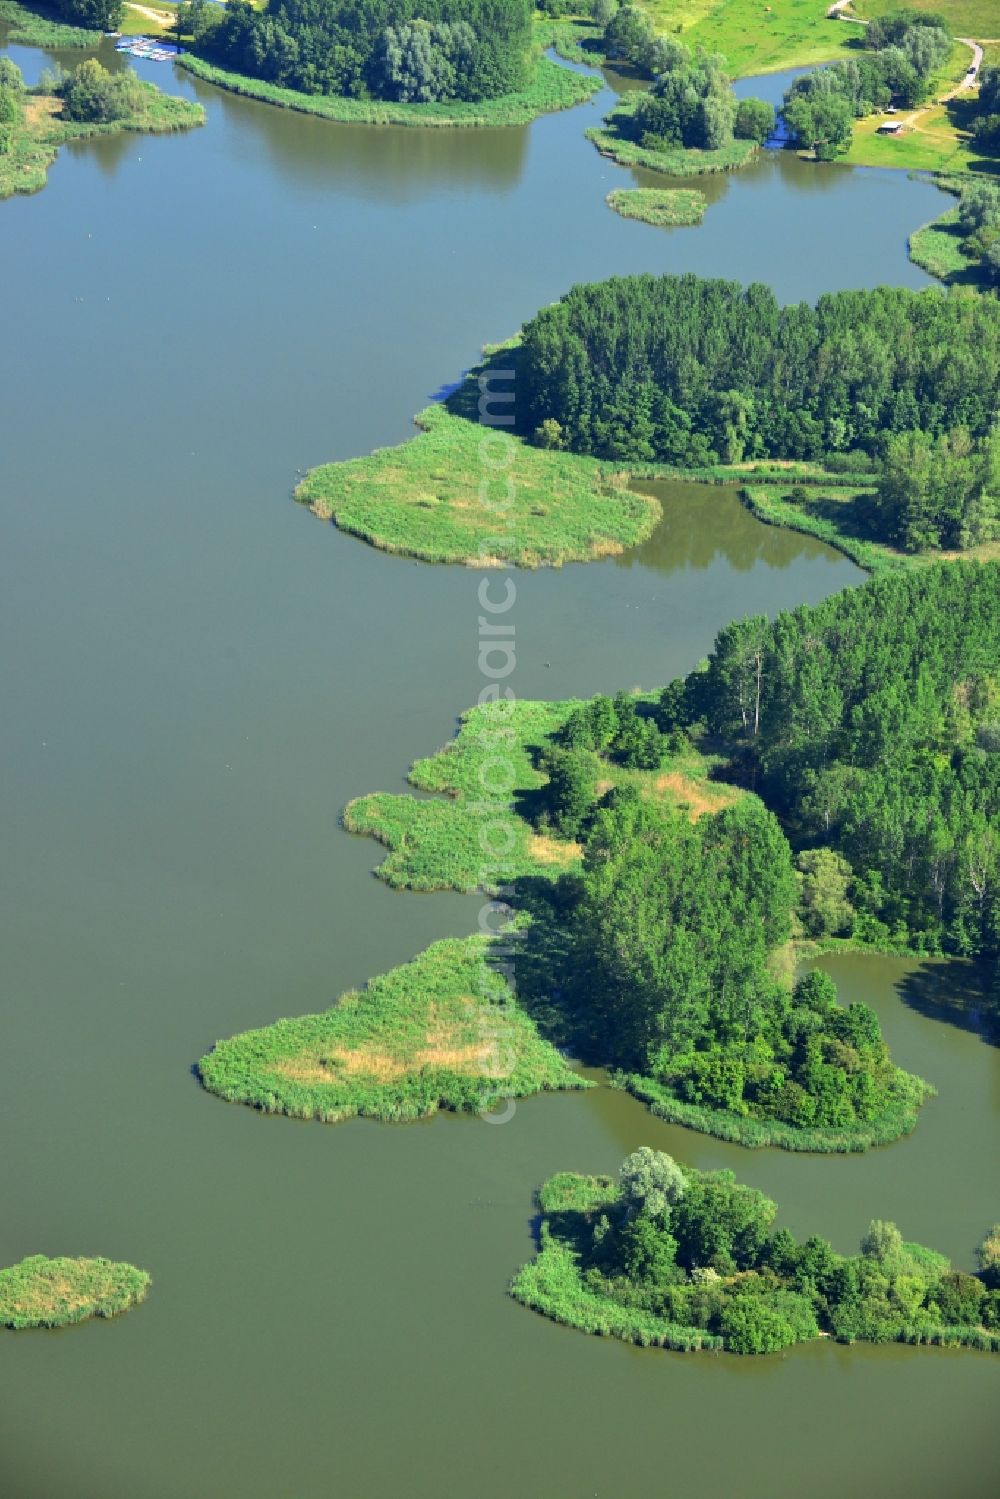 Aerial photograph Oberkrämer - View of the Mühlen lake in the local district Vehlefanz of the municipality Oberkrämer in Brandenburg. The lake was created by the LPG to be used as a water reservoir to irrigate the surrounding fields. To this day, the lake is still used for that